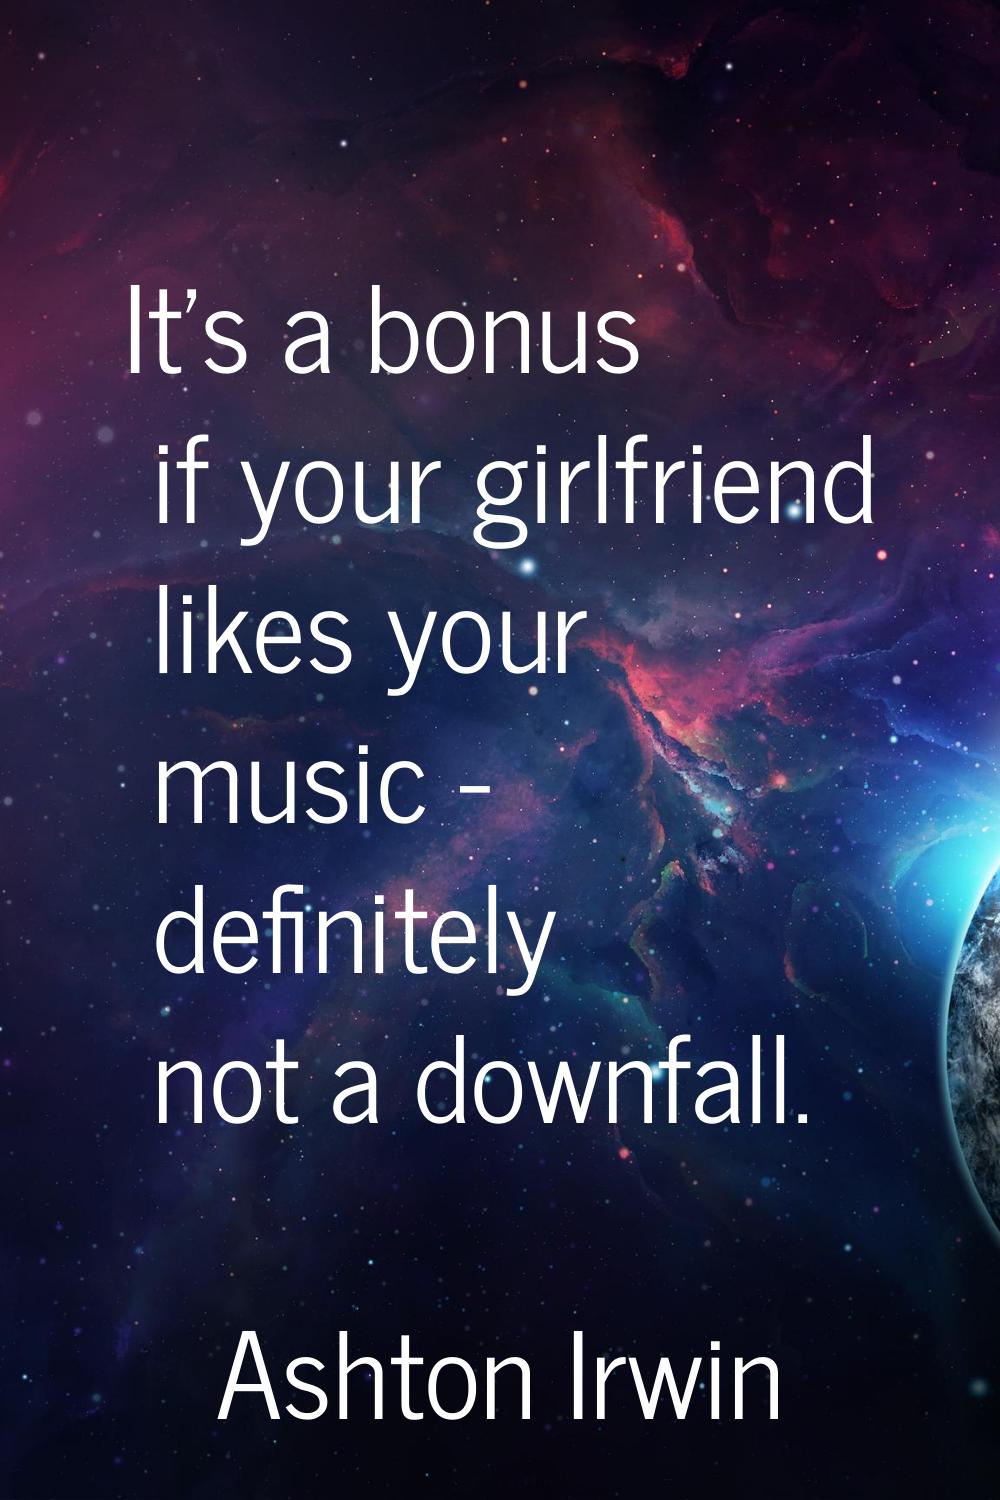 It's a bonus if your girlfriend likes your music - definitely not a downfall.